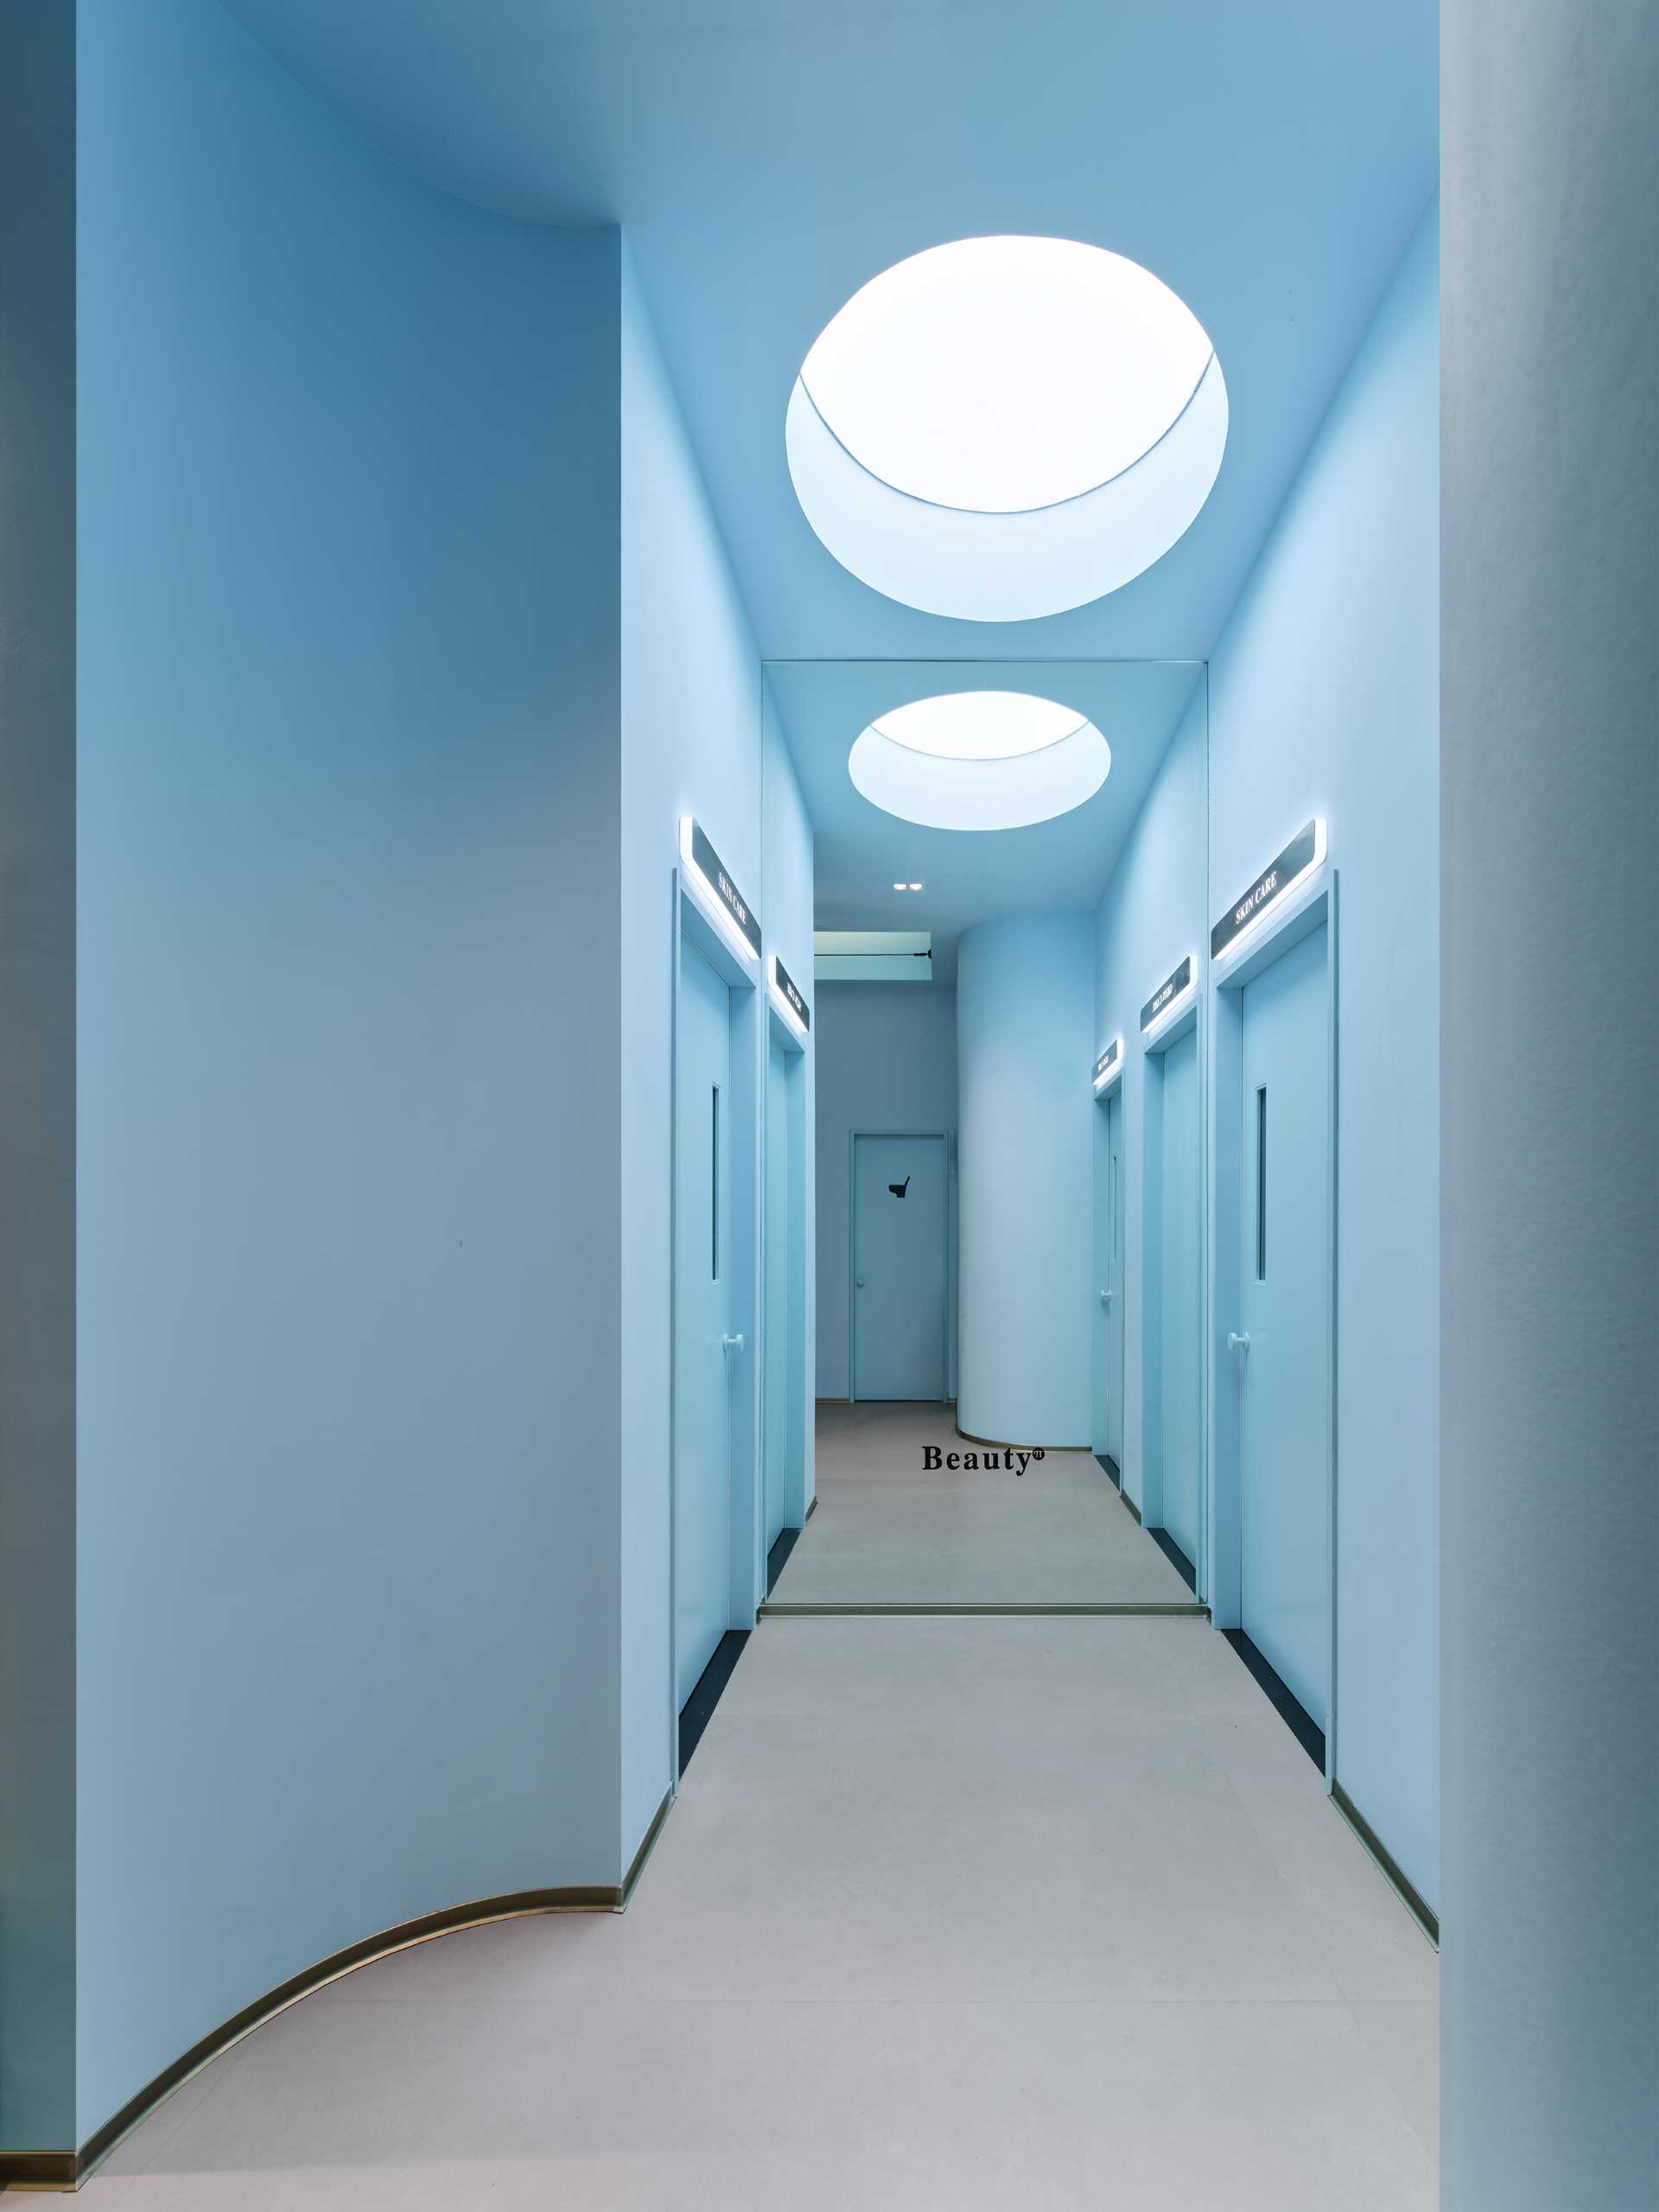 A light blue hallway leads to the various treatment rooms of this modern skincare center.